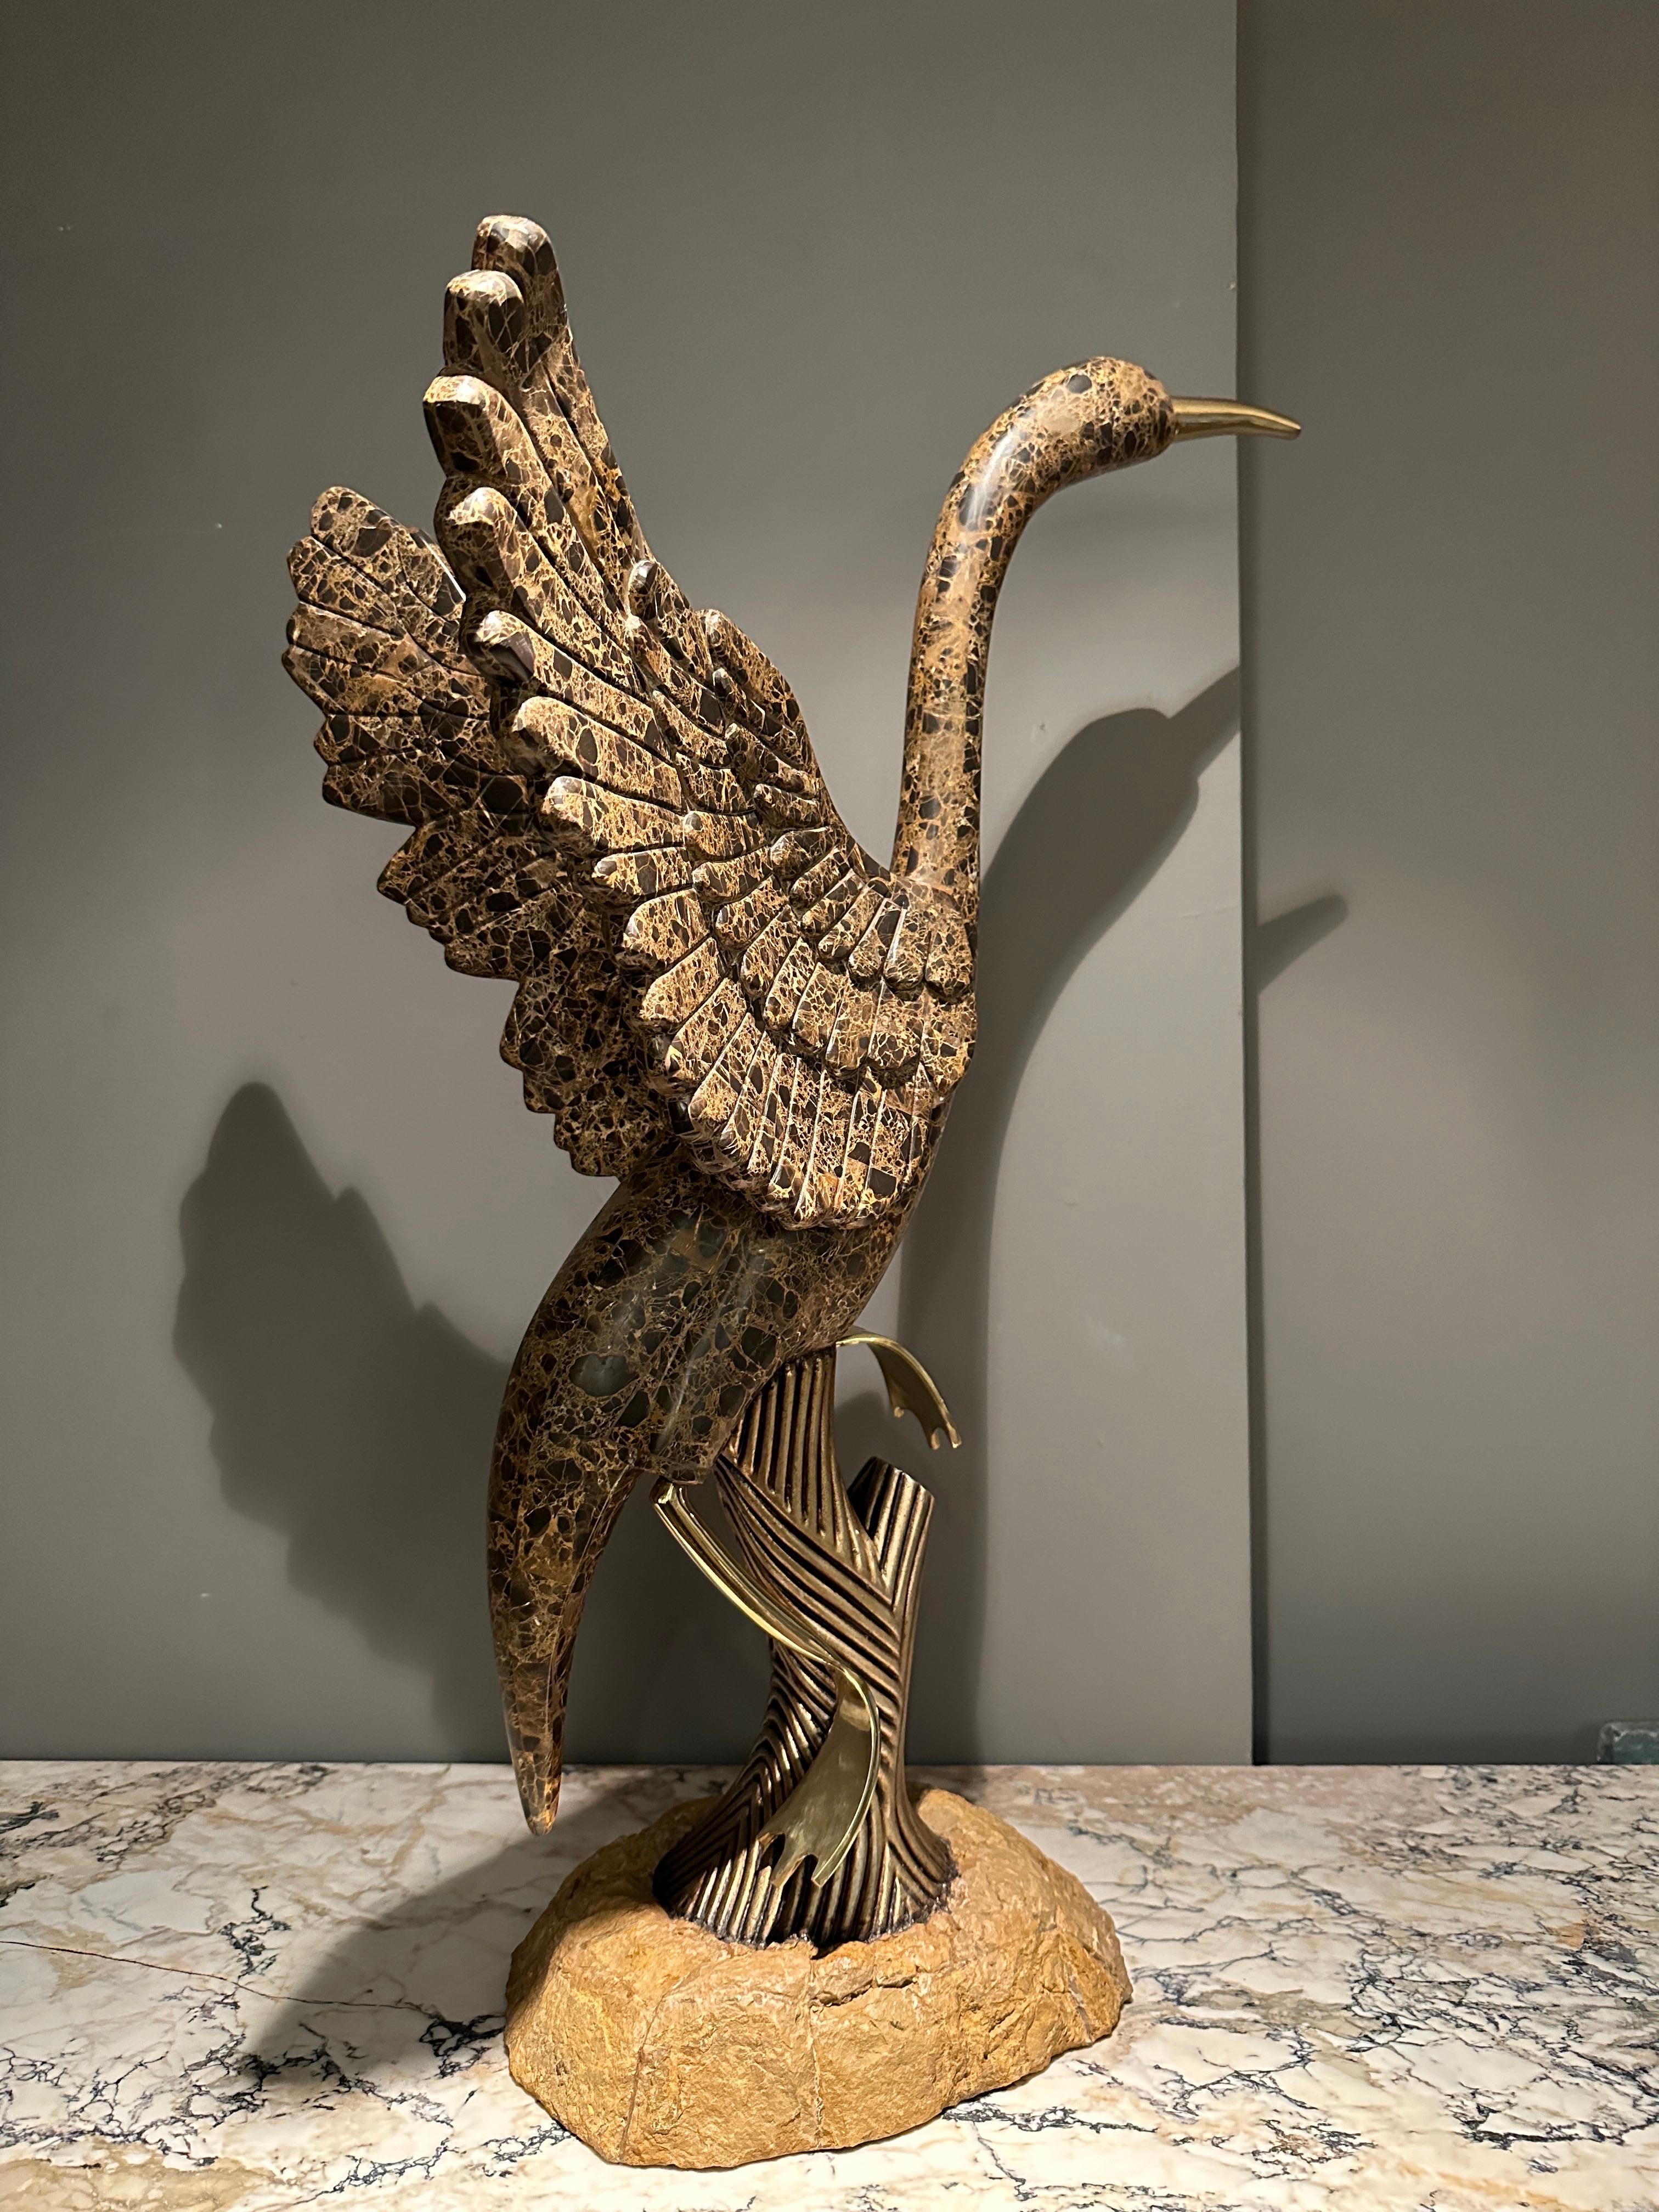 A large perched crane bird sculpture in tessellated Emporador marble and brass by Maitland Smith USA. Great scale, size and caught in perfect movement this modernist stylised sculpture capturing this Bird very well. 

The use of tessellation